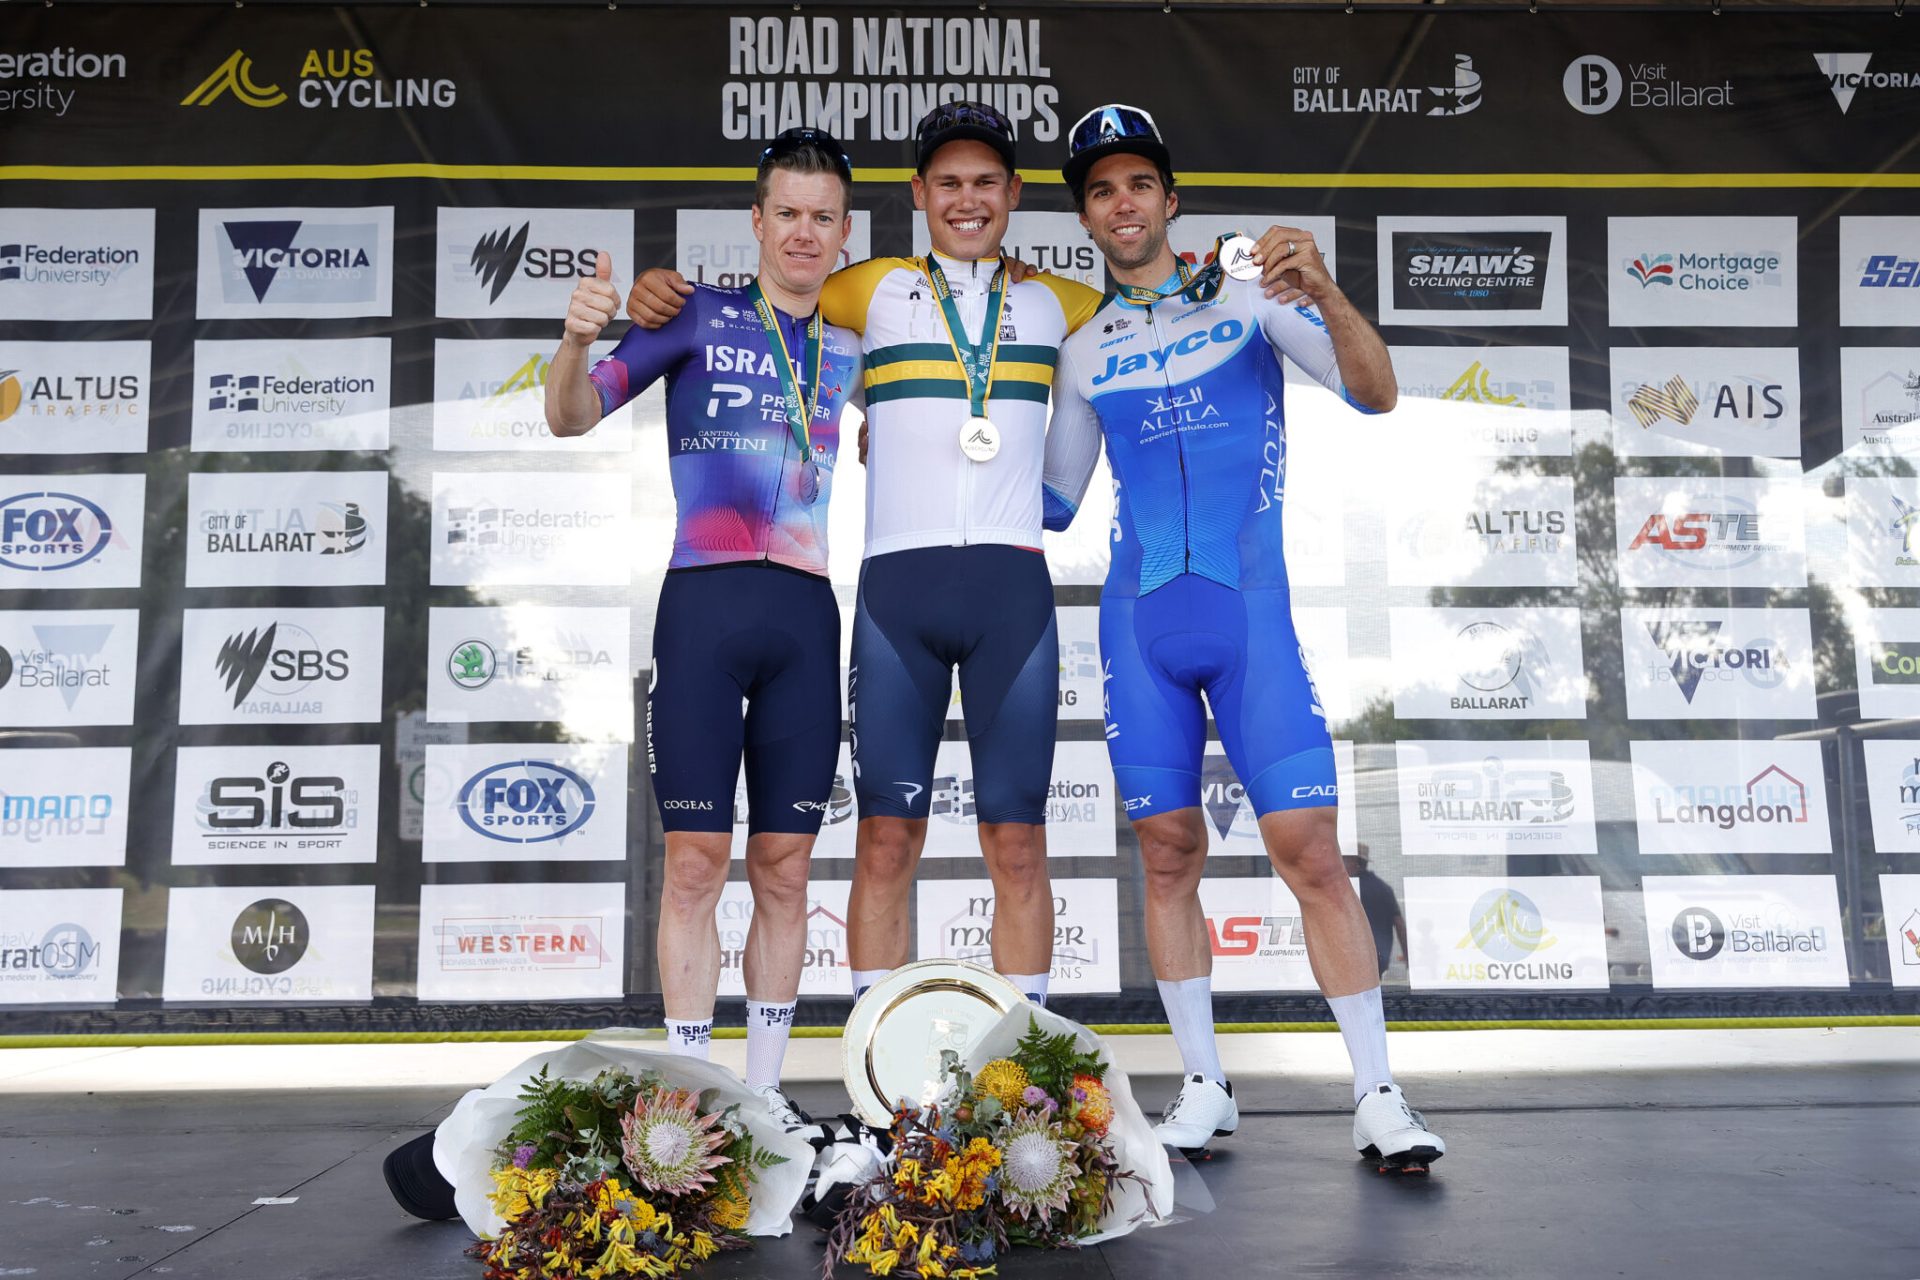 Simon Clarke, Luke Plapp, and Michael Mathews on the podium at Road Nationals, arm in arm, with Plapp in the centre, and Clarke on the left and Matthews on the right. Two bouquets of flowers lie at Plapp's feet.